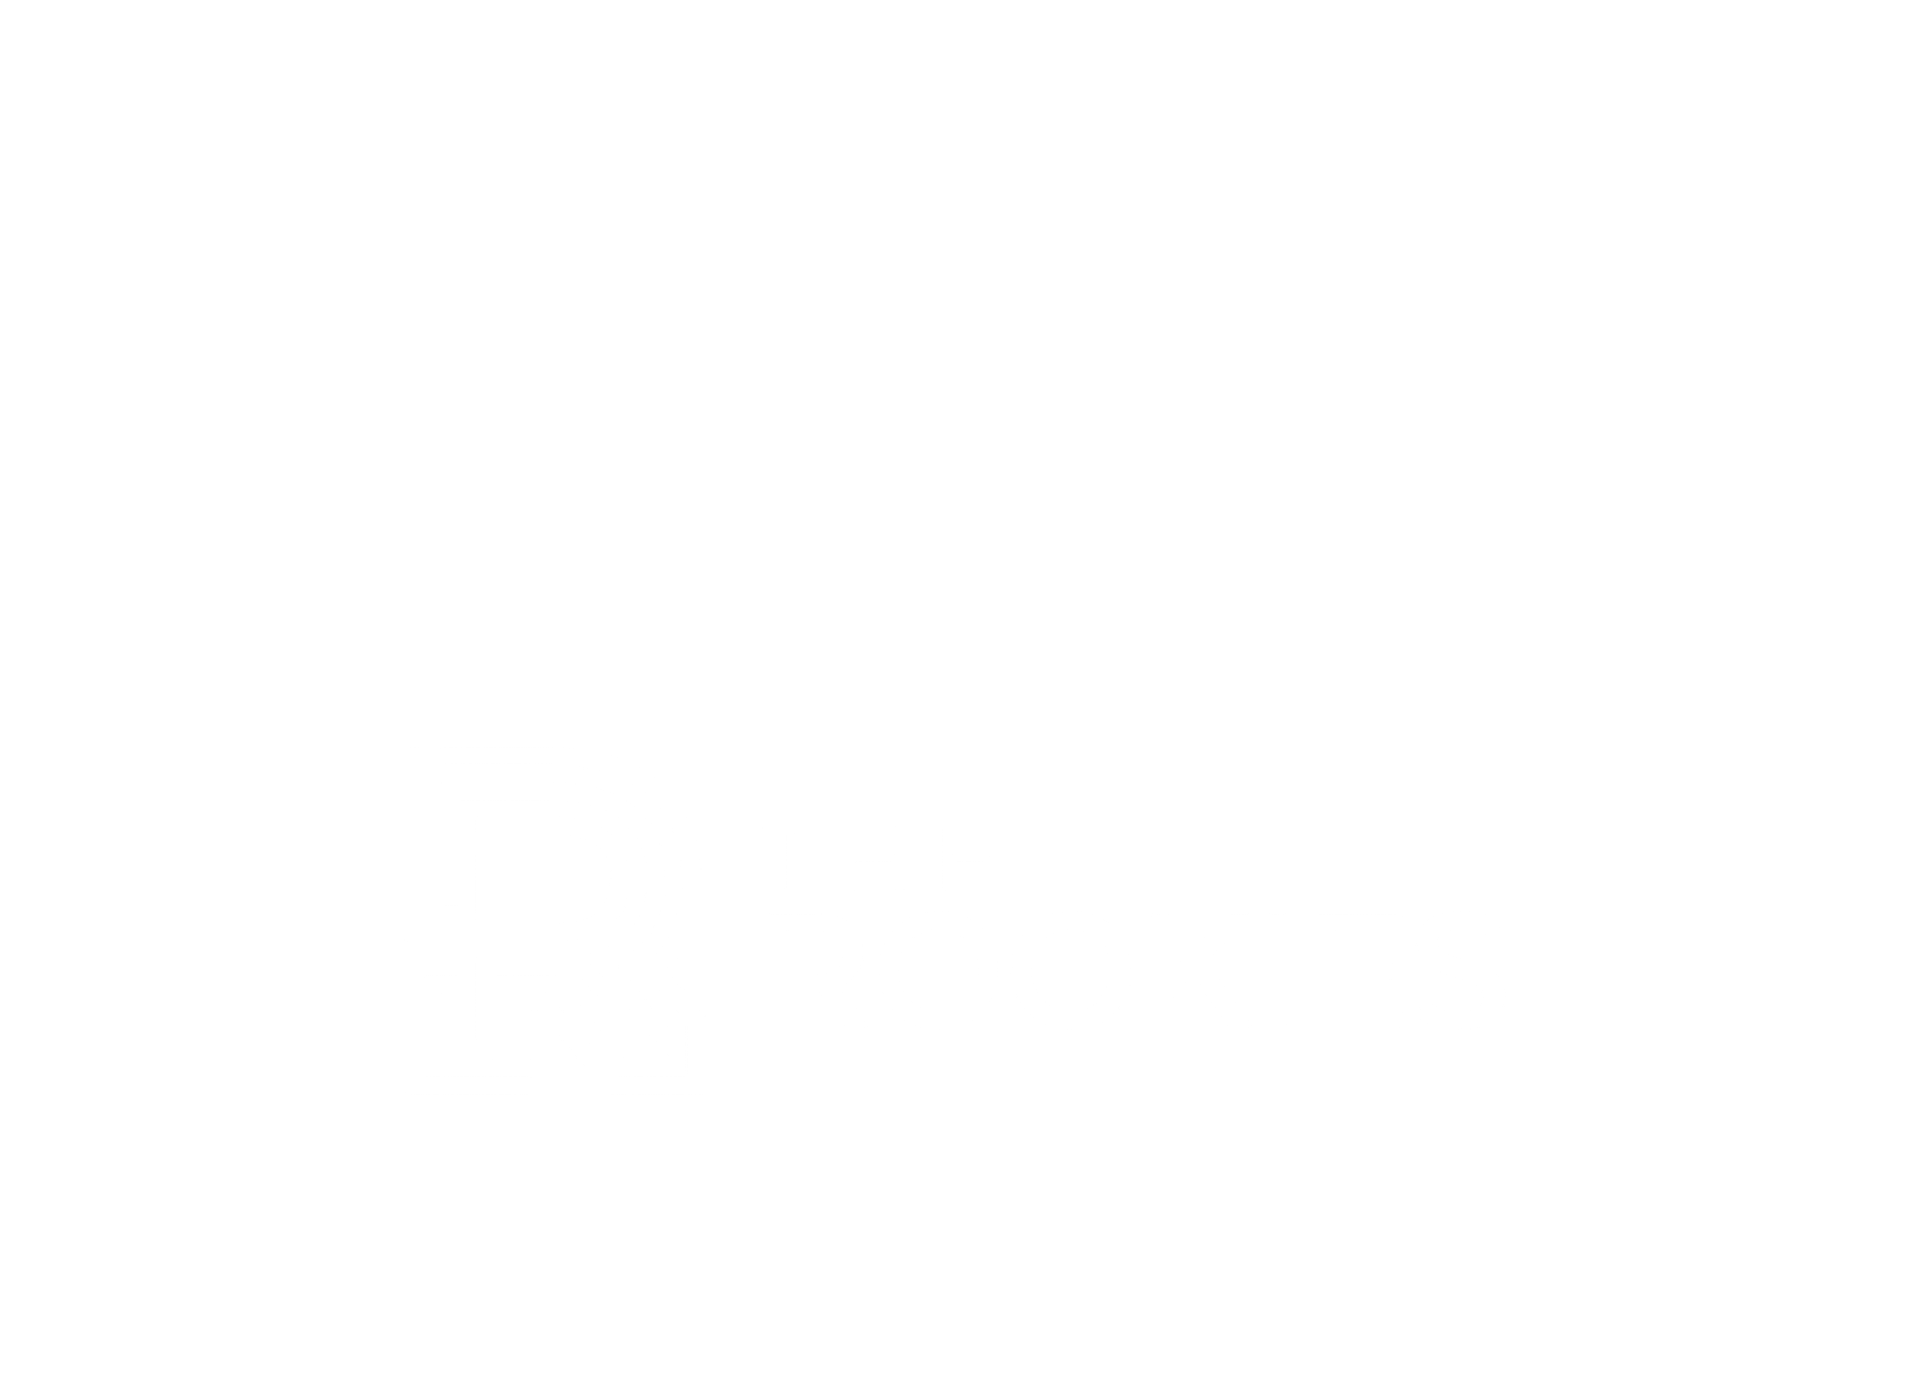 Recognition from The Rookies to Lost Boys as the second best VFX school in North America 2021.